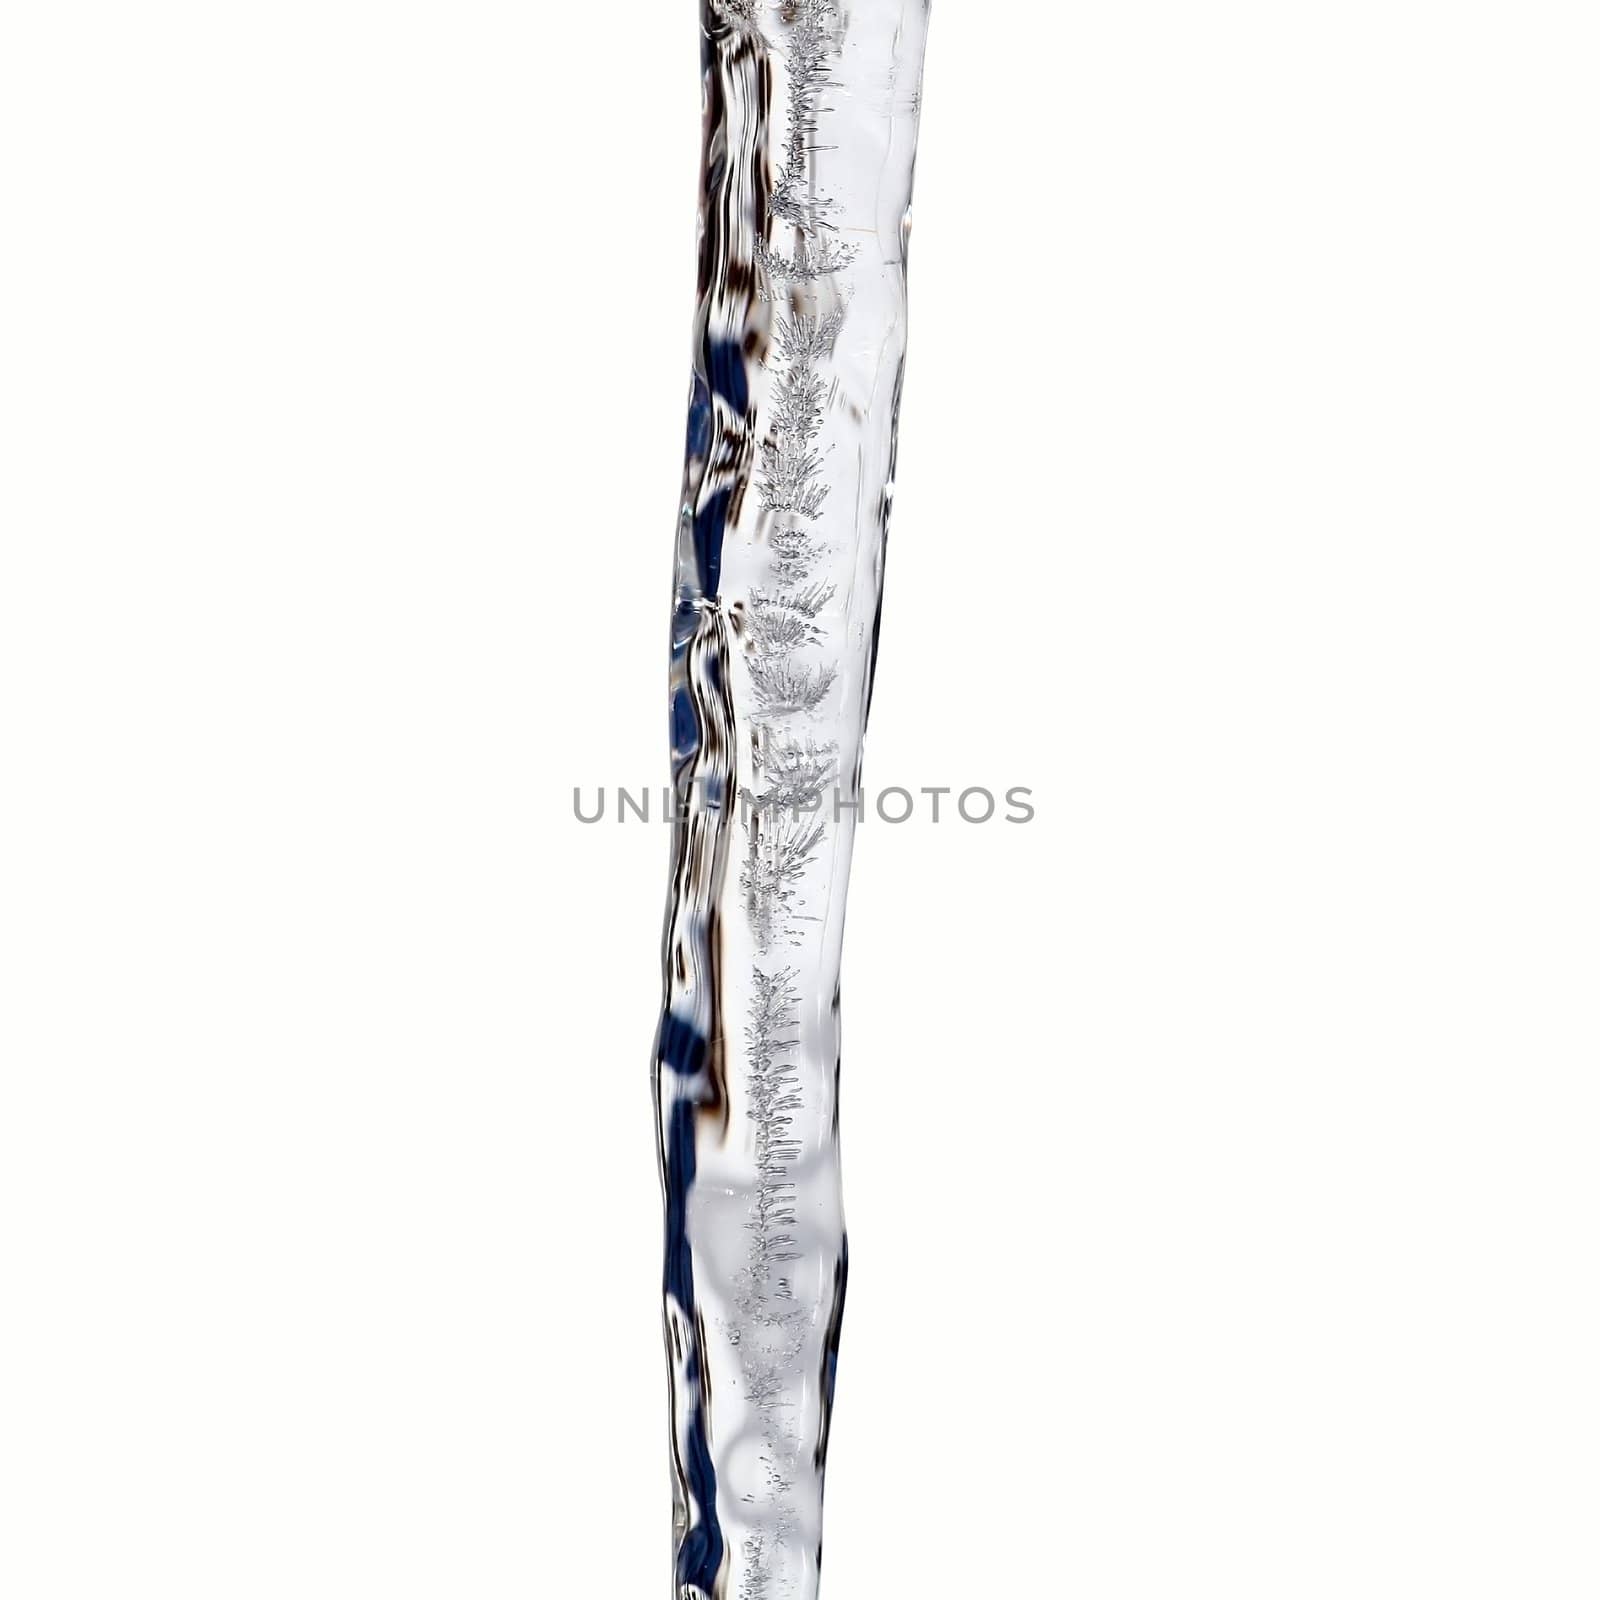 Close view of a icicles with wonderful structures isolated on a white background